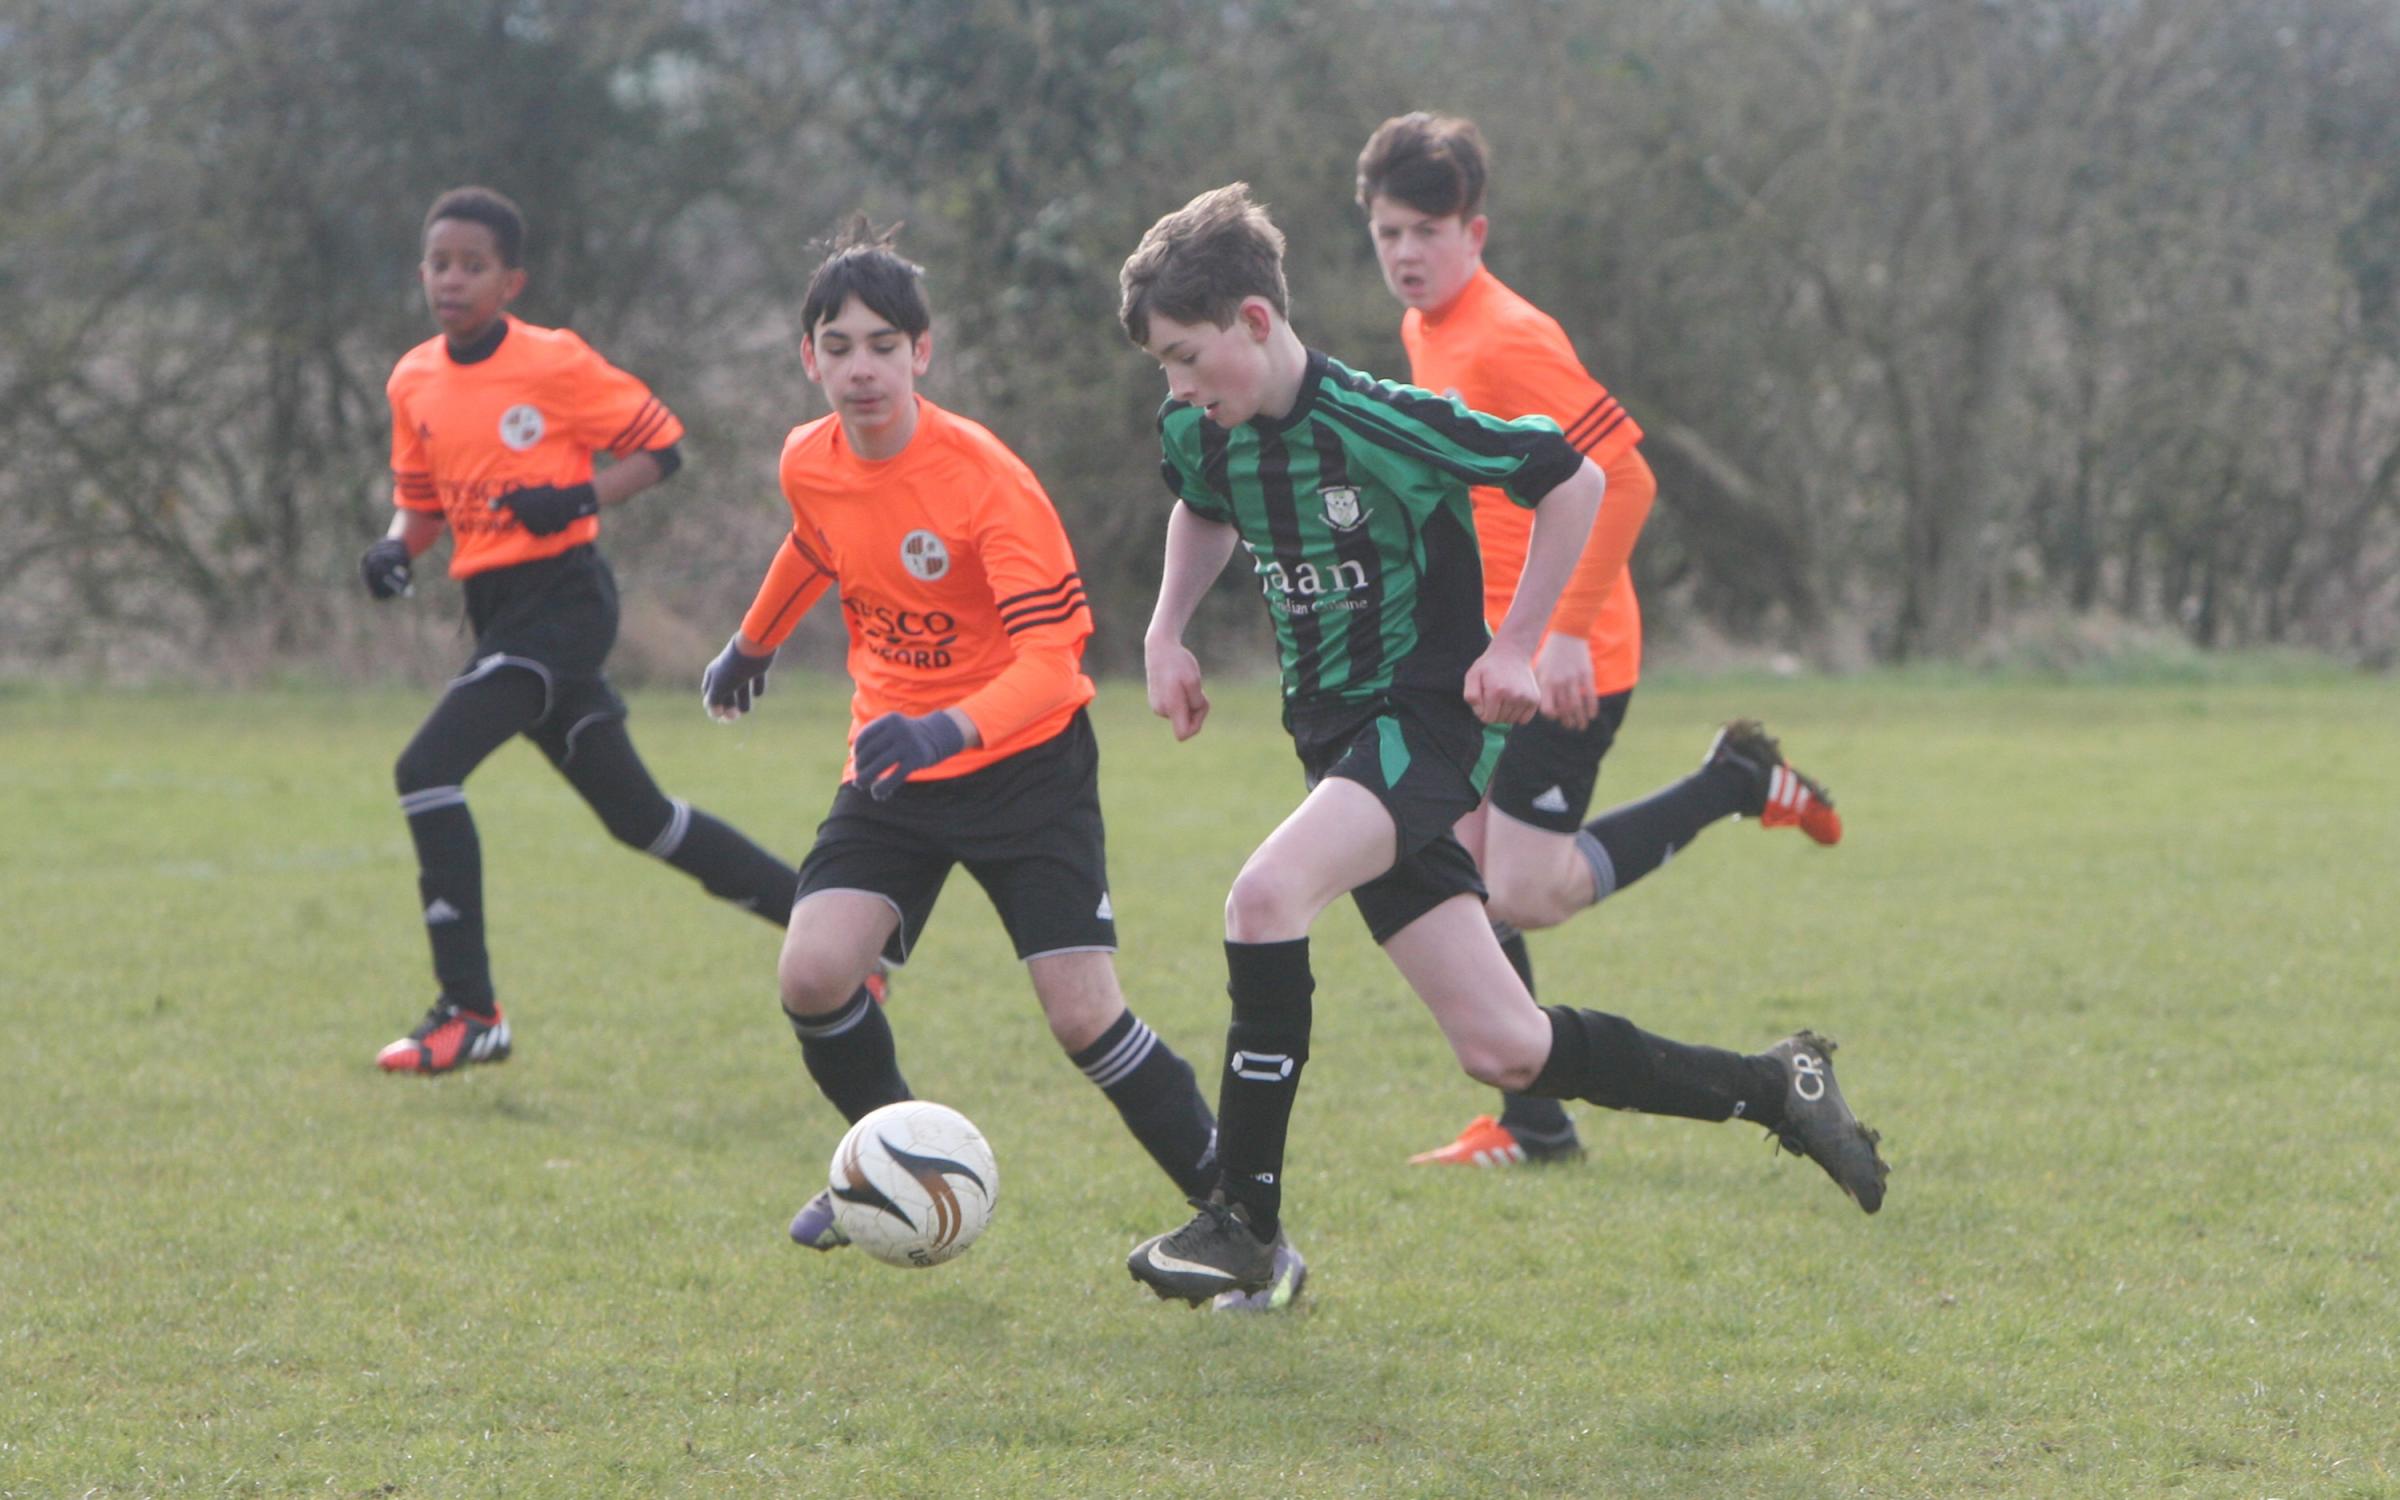 FOOTBALL: Super Jason Moore grabs a hat-trick as Ardley United book semi-final spot in Under 12 KO Cup